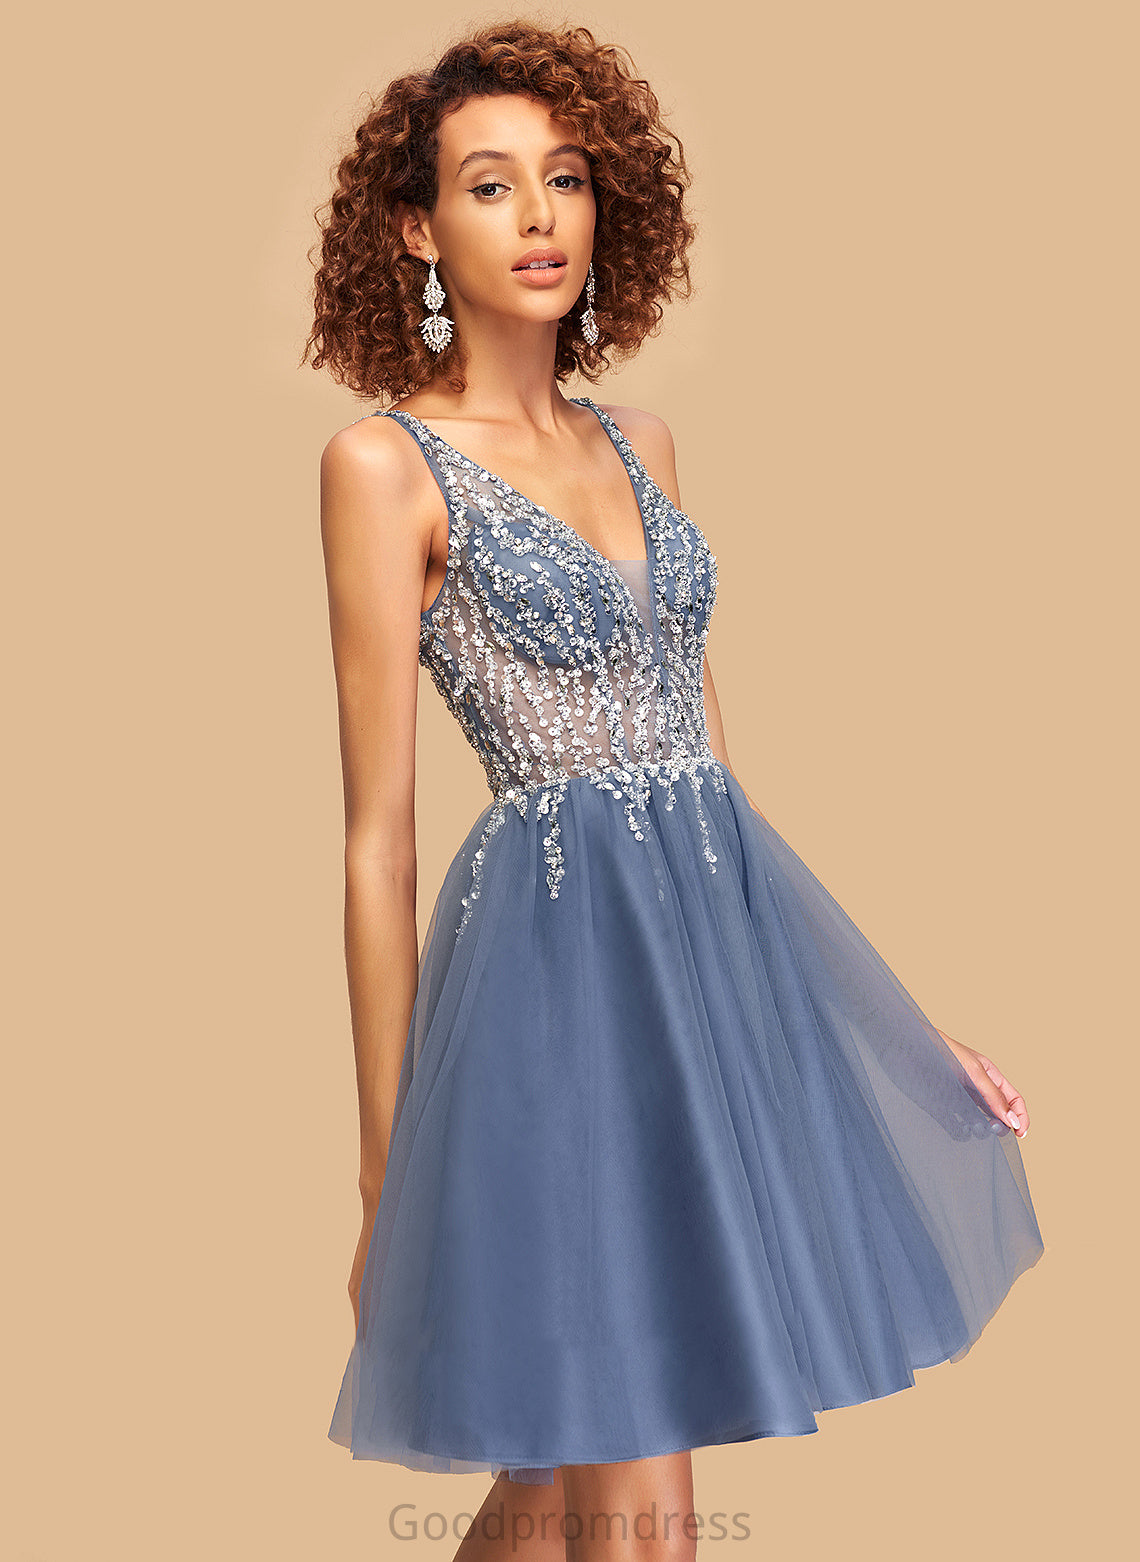 A-Line Sequins Homecoming Dresses V-neck With Beading Short/Mini Charlotte Dress Homecoming Tulle